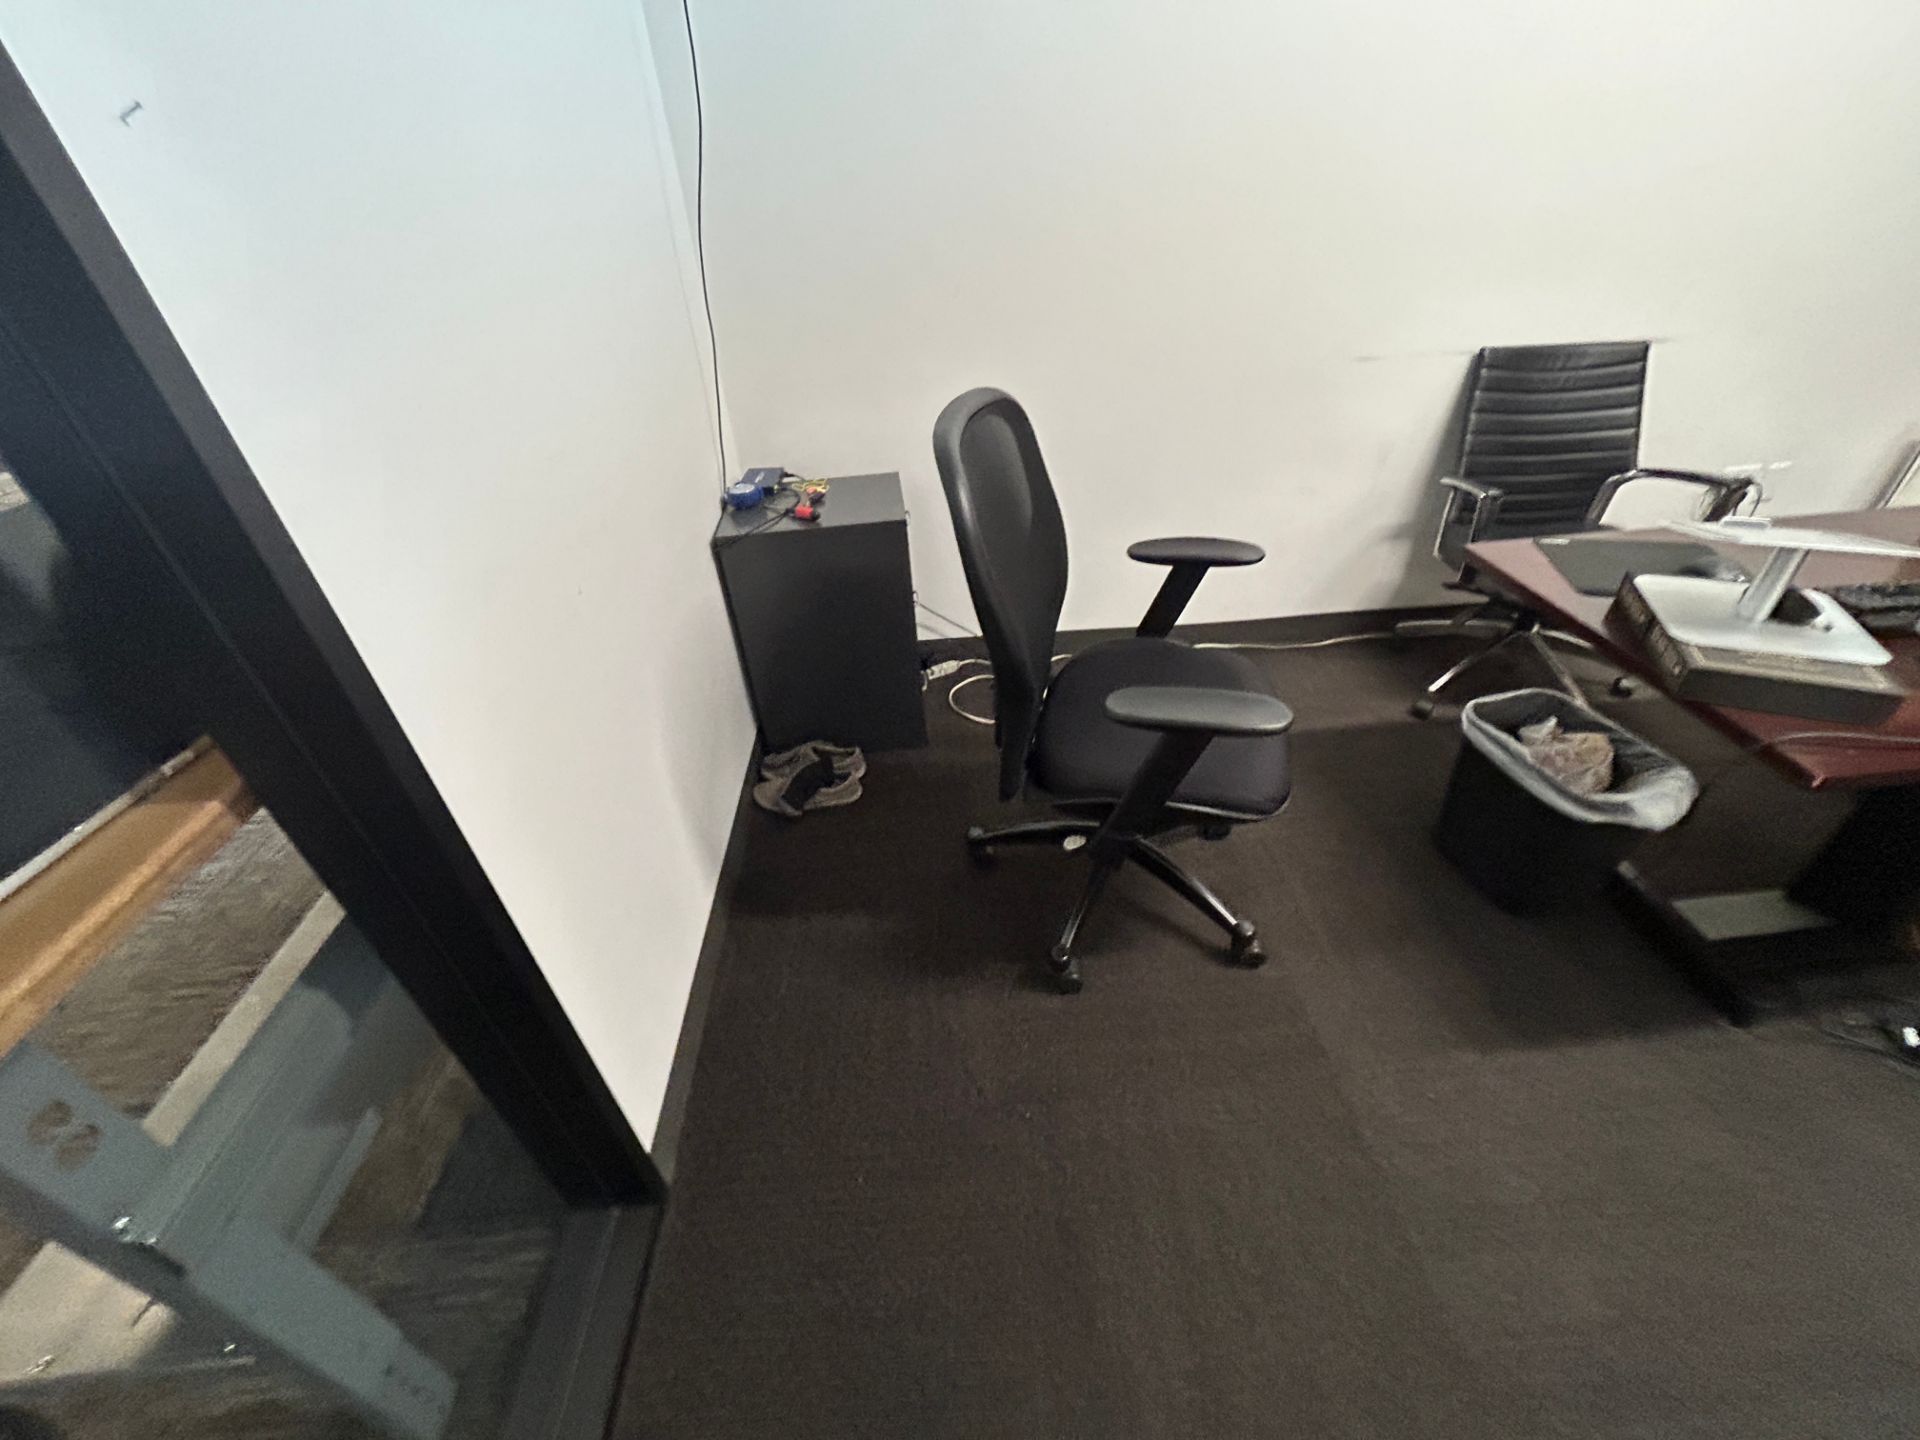 Lot - Office Furniture Consisting of a Desk, Sorting Table, Adjustable Executive Chairs, Frameless - Image 2 of 2